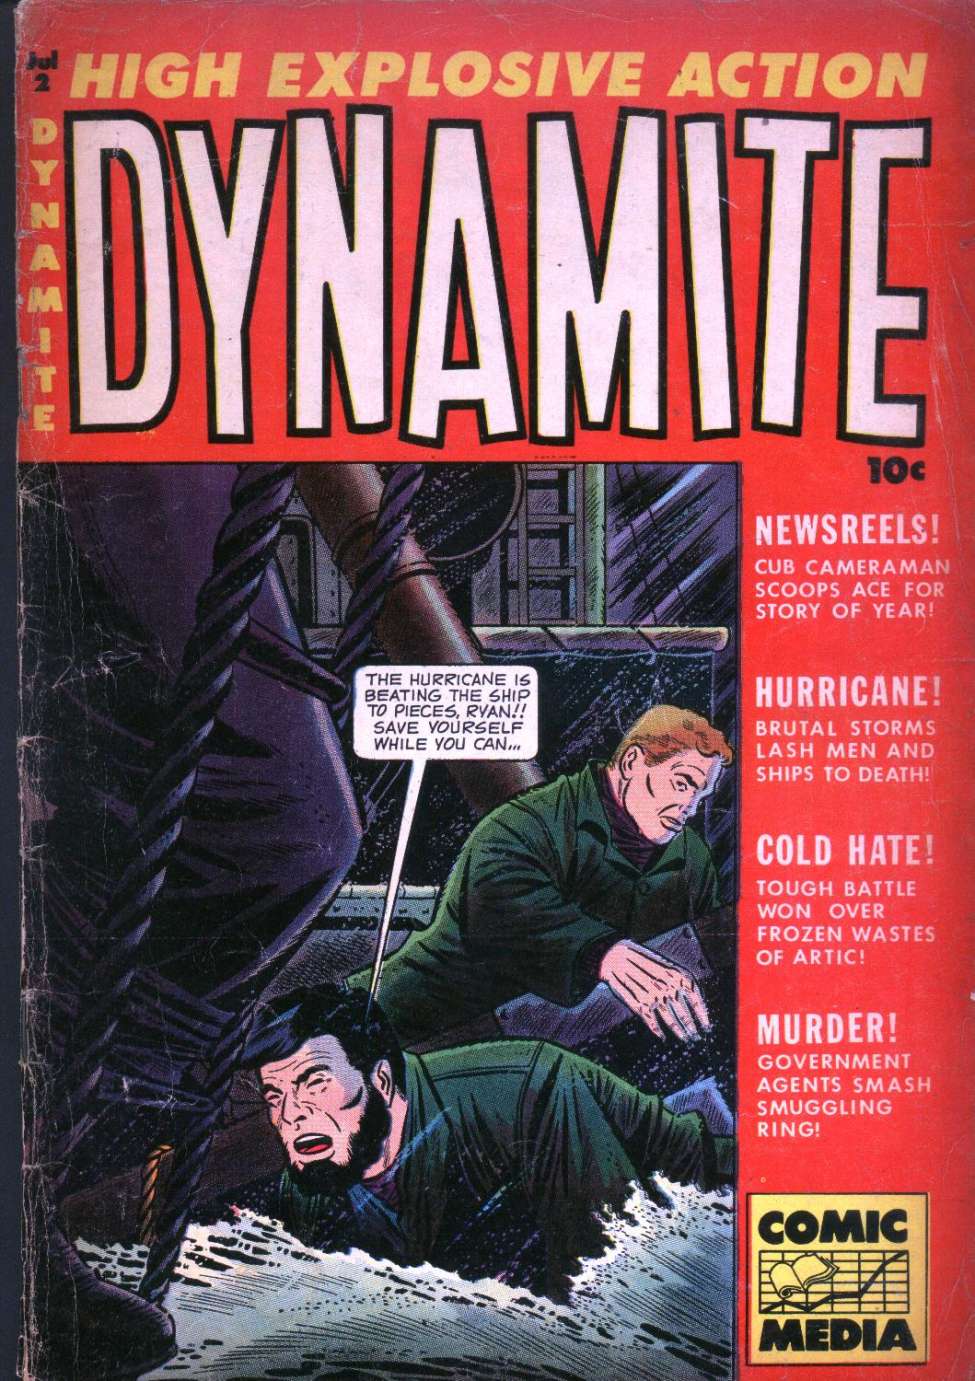 Book Cover For Dynamite 2